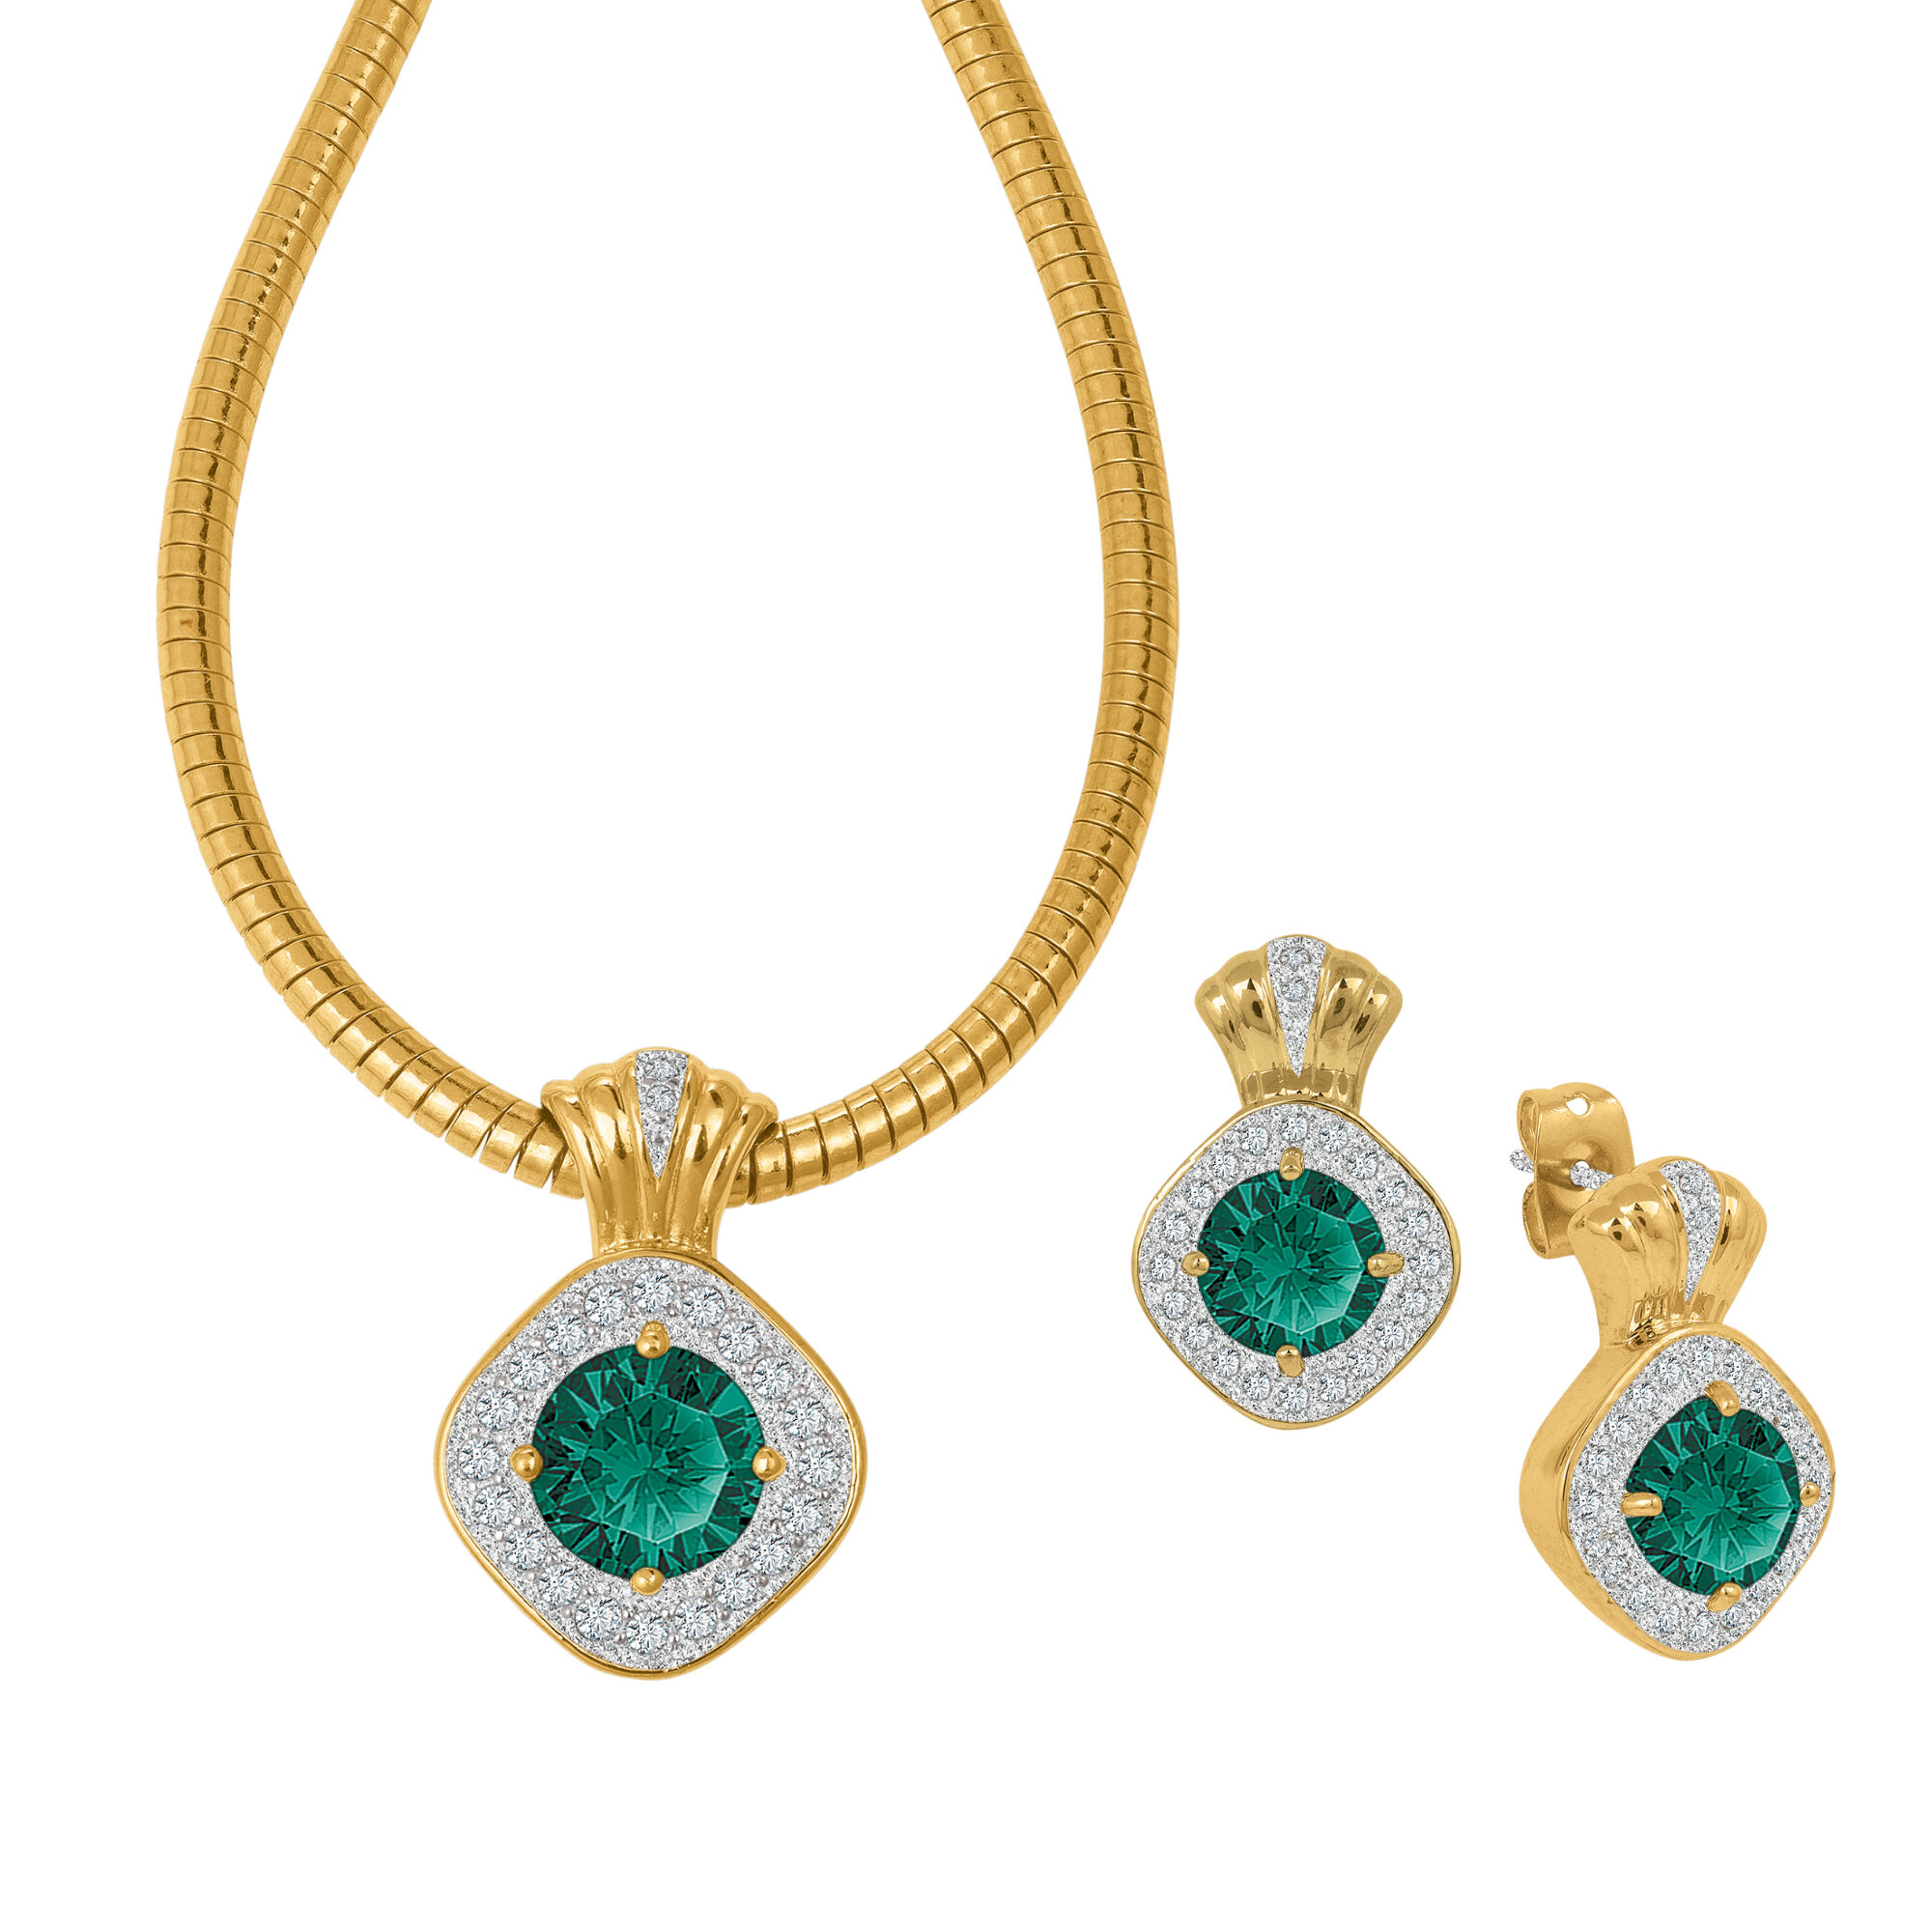 Birthstone Necklace Earring Set 10787 0016 e may